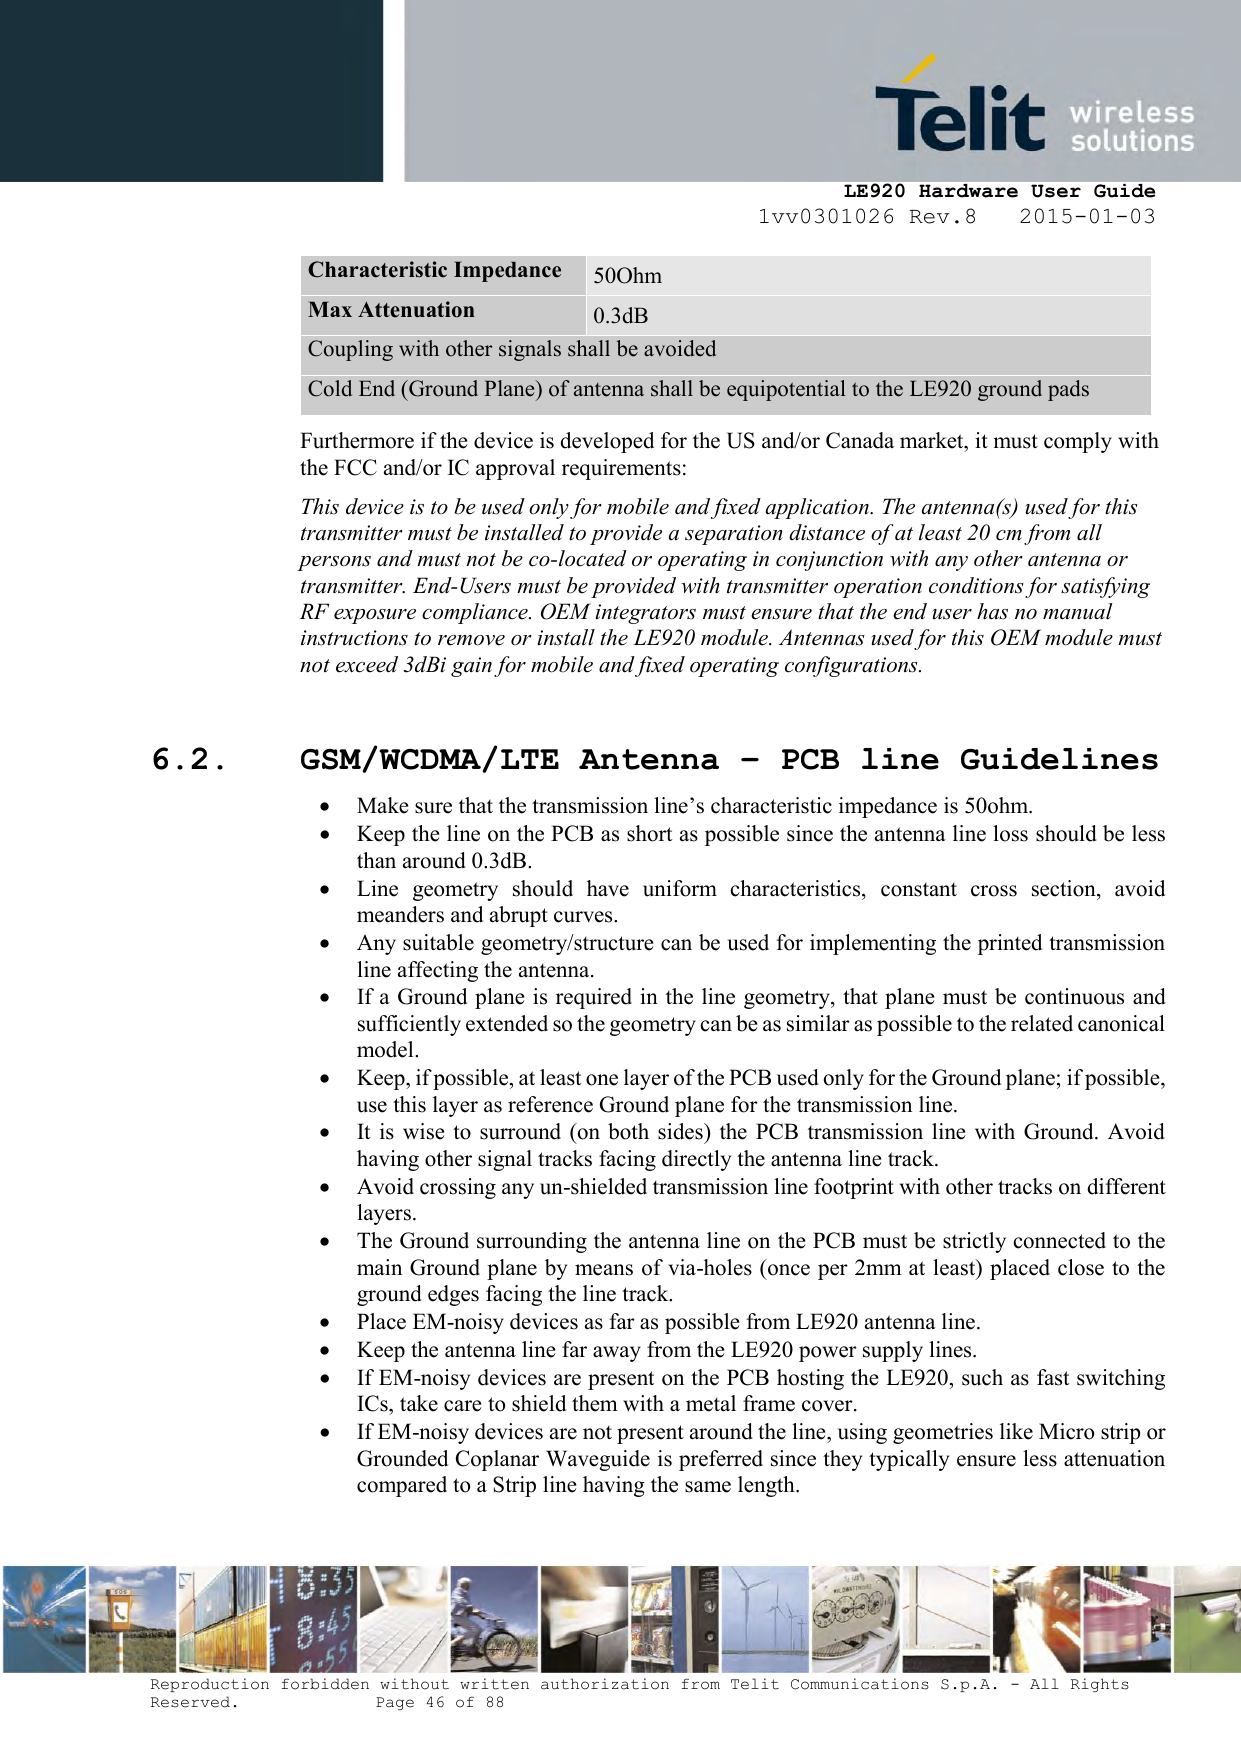     LE920 Hardware User Guide 1vv0301026 Rev.8   2015-01-03 Reproduction forbidden without written authorization from Telit Communications S.p.A. - All Rights Reserved.    Page 46 of 88  Characteristic Impedance 50Ohm Max Attenuation 0.3dB Coupling with other signals shall be avoided Cold End (Ground Plane) of antenna shall be equipotential to the LE920 ground pads Furthermore if the device is developed for the US and/or Canada market, it must comply with the FCC and/or IC approval requirements: This device is to be used only for mobile and fixed application. The antenna(s) used for this transmitter must be installed to provide a separation distance of at least 20 cm from all persons and must not be co-located or operating in conjunction with any other antenna or transmitter. End-Users must be provided with transmitter operation conditions for satisfying RF exposure compliance. OEM integrators must ensure that the end user has no manual instructions to remove or install the LE920 module. Antennas used for this OEM module must not exceed 3dBi gain for mobile and fixed operating configurations.  6.2. GSM/WCDMA/LTE Antenna – PCB line Guidelines  Make sure that the transmission line’s characteristic impedance is 50ohm.  Keep the line on the PCB as short as possible since the antenna line loss should be less than around 0.3dB.  Line  geometry  should  have  uniform  characteristics,  constant  cross  section,  avoid meanders and abrupt curves.  Any suitable geometry/structure can be used for implementing the printed transmission line affecting the antenna.  If a Ground plane is required in the line geometry, that plane must be continuous and sufficiently extended so the geometry can be as similar as possible to the related canonical model.  Keep, if possible, at least one layer of the PCB used only for the Ground plane; if possible, use this layer as reference Ground plane for the transmission line.  It is  wise  to surround (on both  sides)  the  PCB transmission  line with  Ground. Avoid having other signal tracks facing directly the antenna line track.  Avoid crossing any un-shielded transmission line footprint with other tracks on different layers.  The Ground surrounding the antenna line on the PCB must be strictly connected to the main Ground plane by means of via-holes (once per 2mm at least) placed close to the ground edges facing the line track.  Place EM-noisy devices as far as possible from LE920 antenna line.  Keep the antenna line far away from the LE920 power supply lines.  If EM-noisy devices are present on the PCB hosting the LE920, such as fast switching ICs, take care to shield them with a metal frame cover.  If EM-noisy devices are not present around the line, using geometries like Micro strip or Grounded Coplanar Waveguide is preferred since they typically ensure less attenuation compared to a Strip line having the same length. 